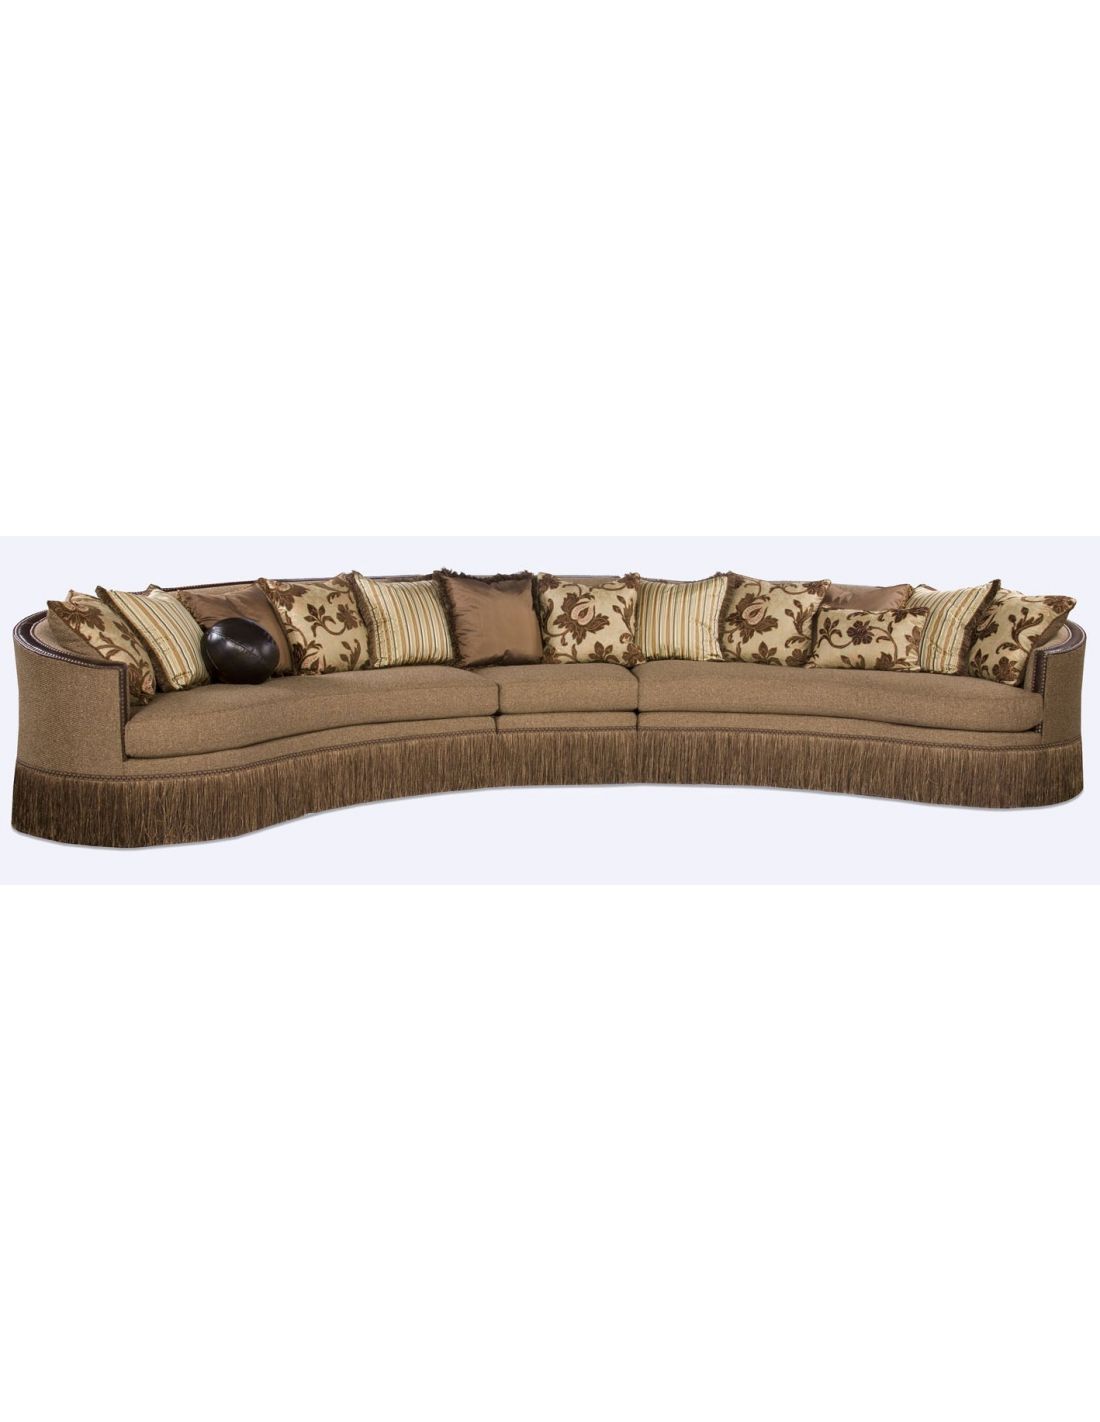 Extra Long Sectional Sofa, Extra Long Leather Sectional